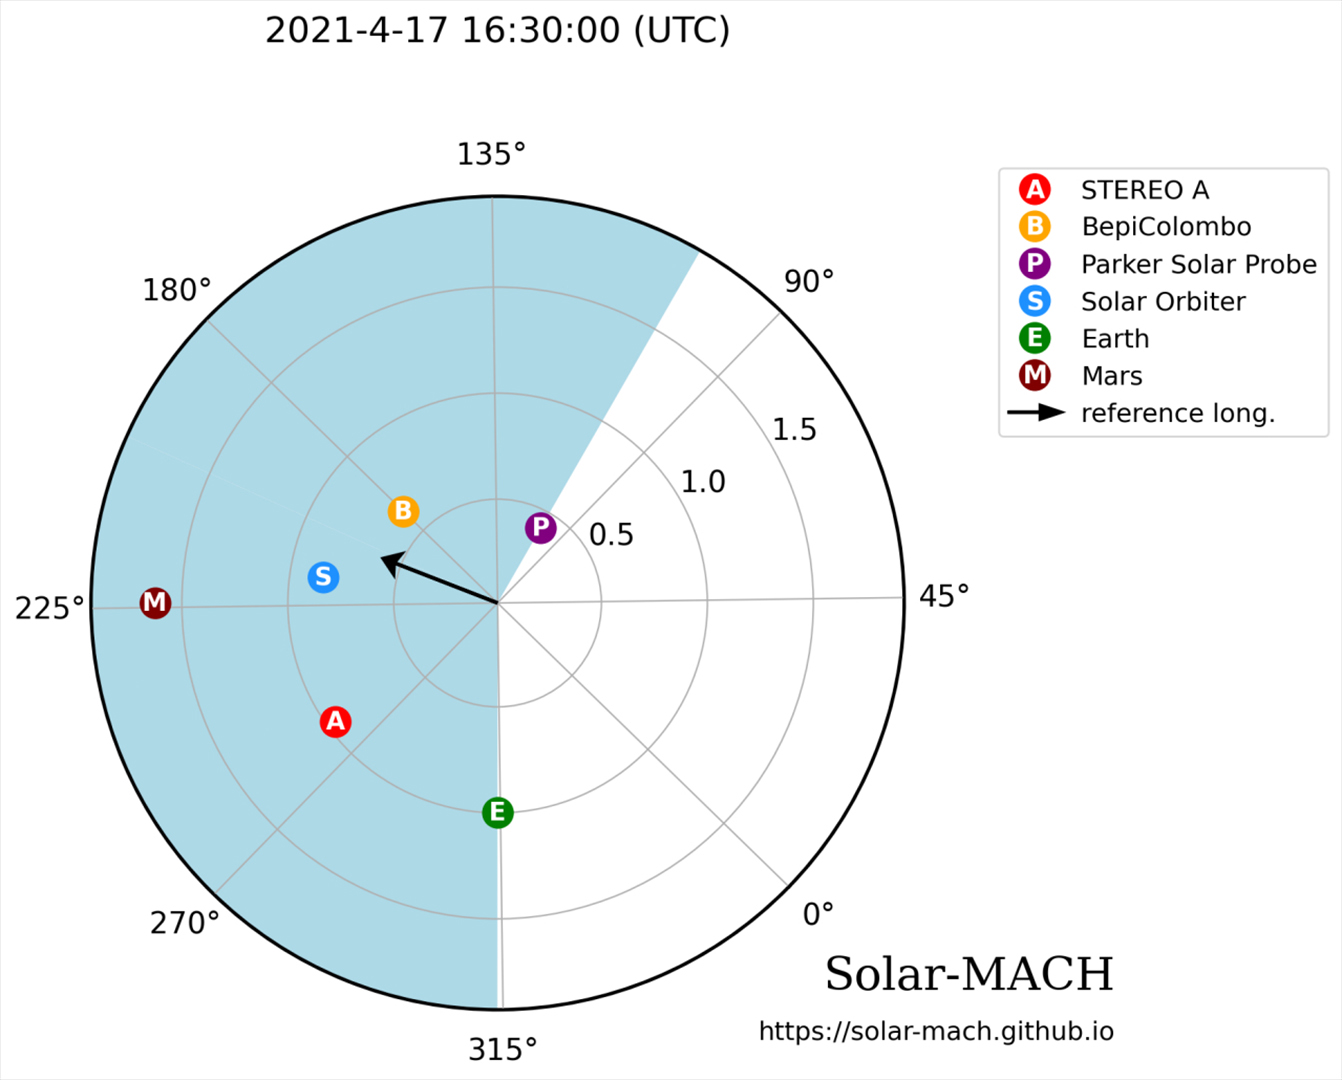 This diagram shows the positions of individual spacecraft, as well as Earth and Mars, during the solar outburst on April 17, 2021.